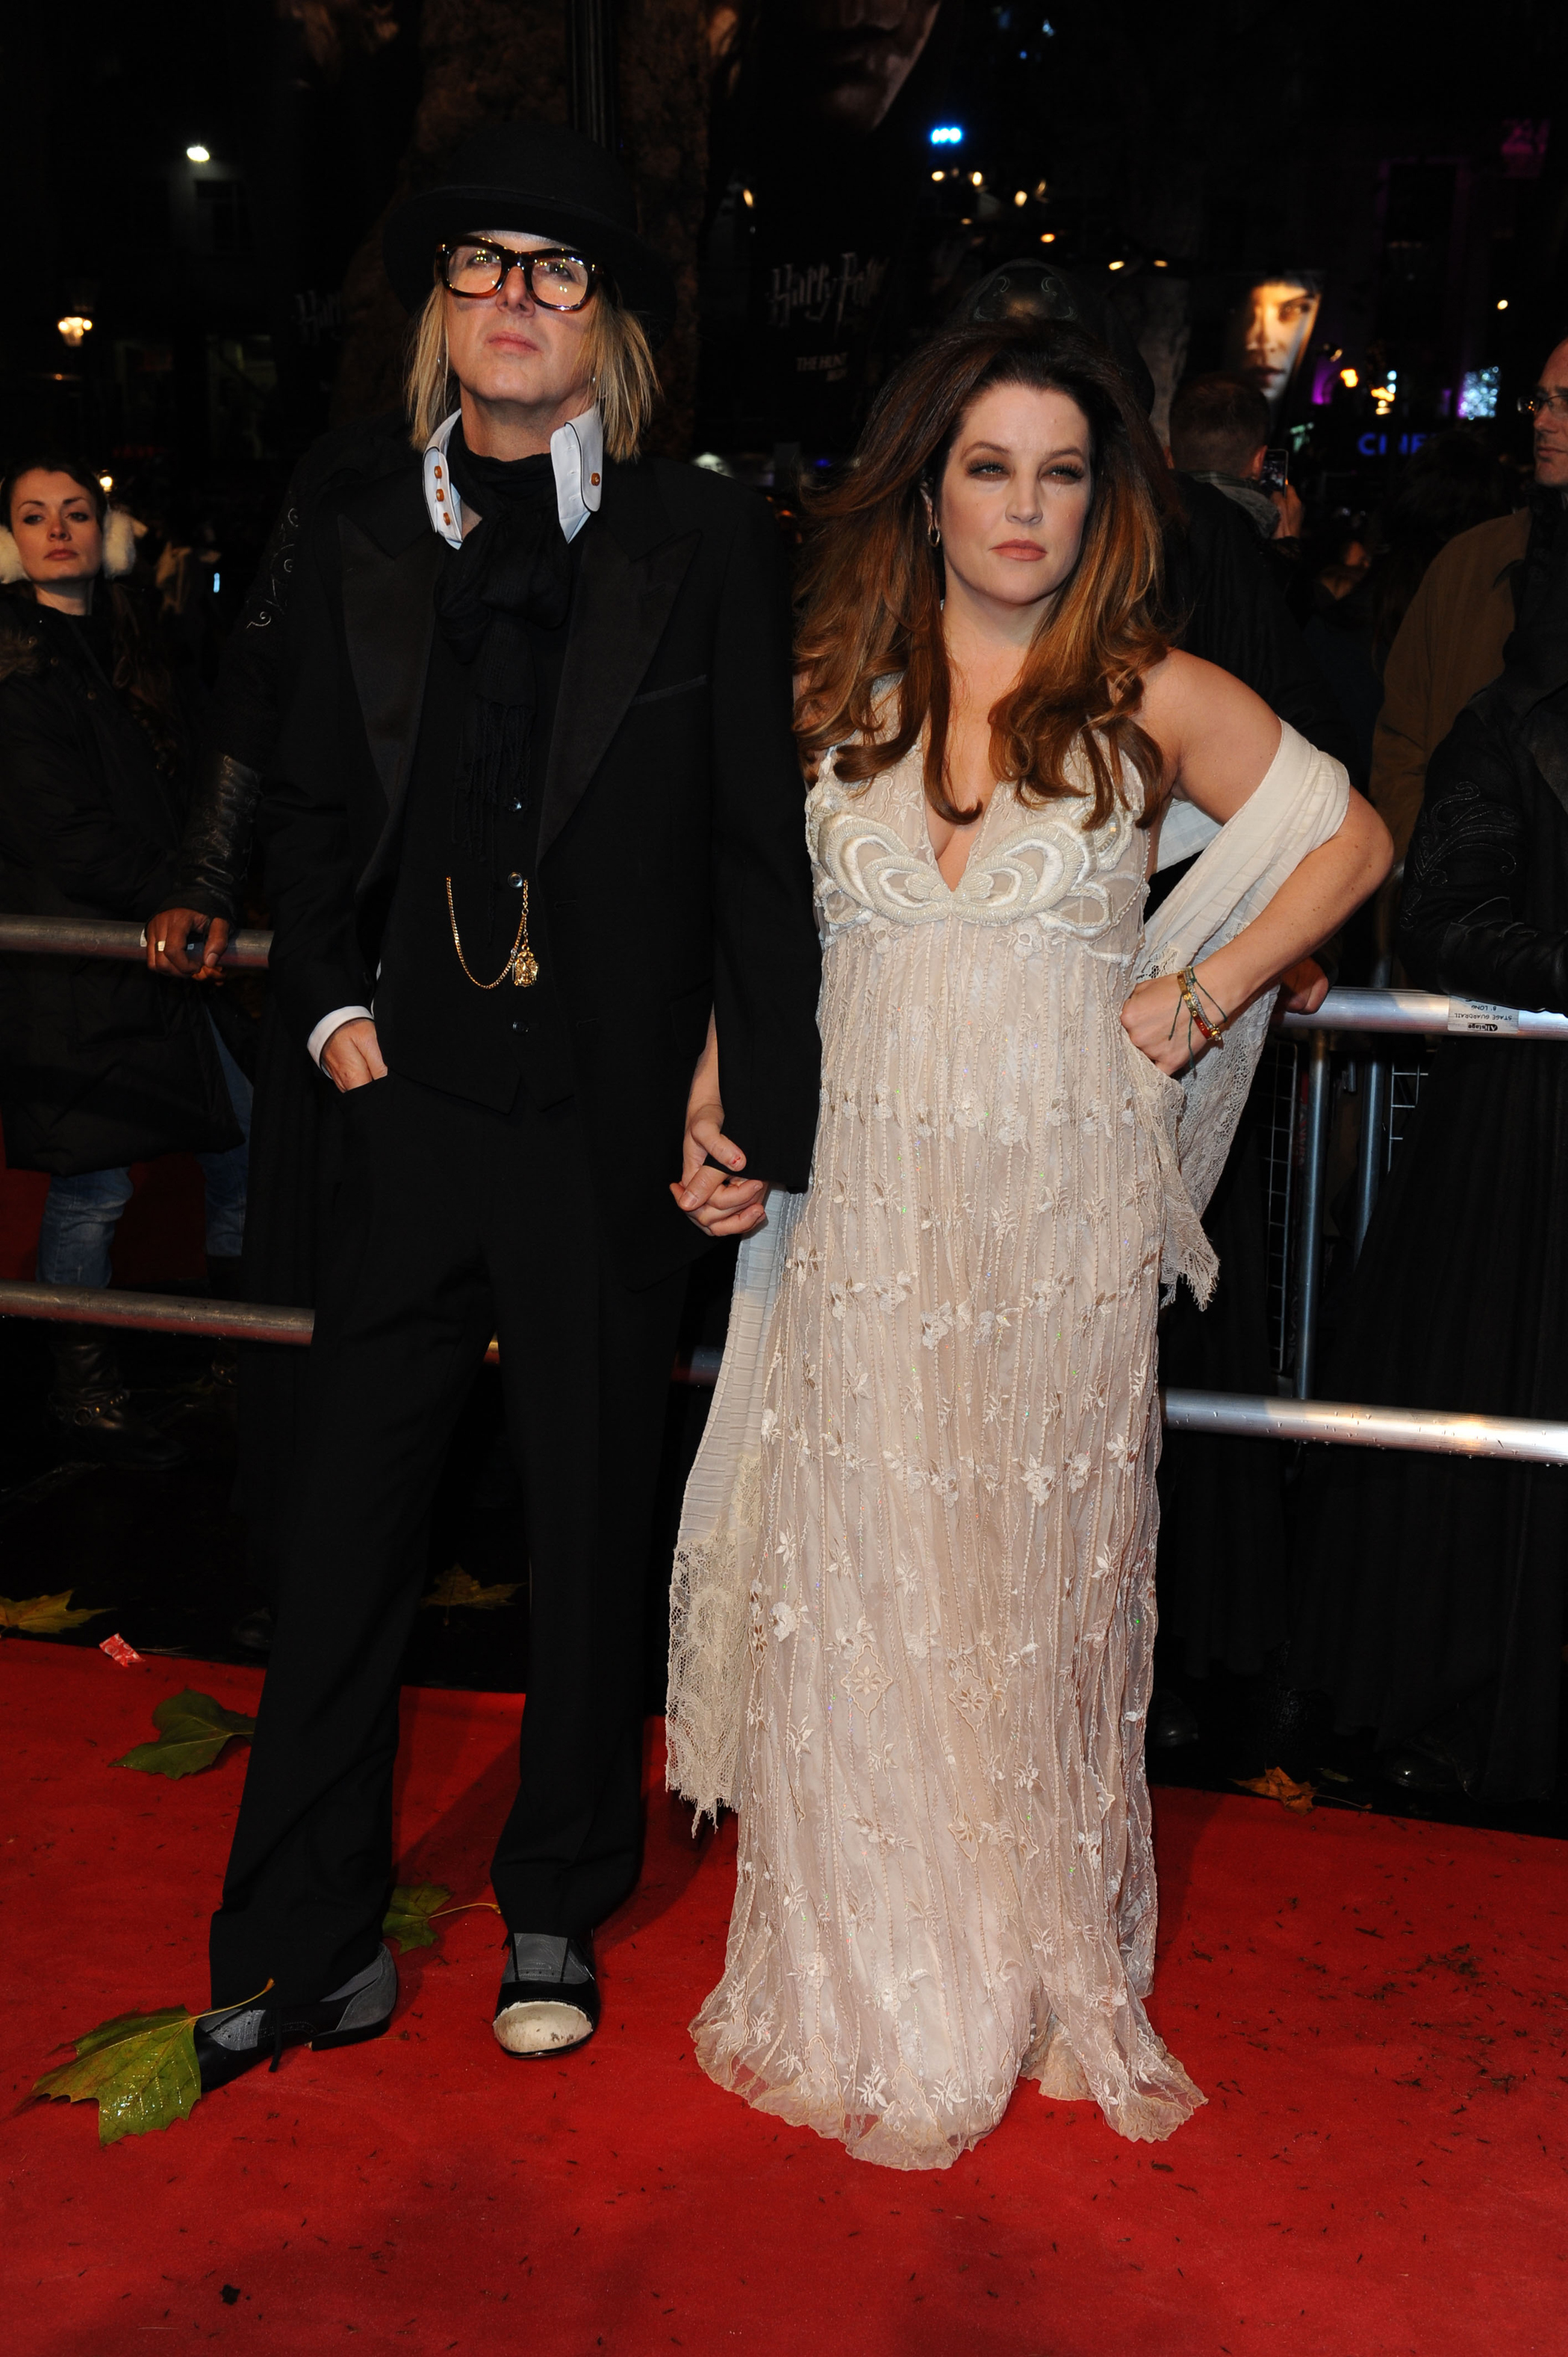 Michael Lockwood and Lisa Marie Presley on the red carpet in 2010